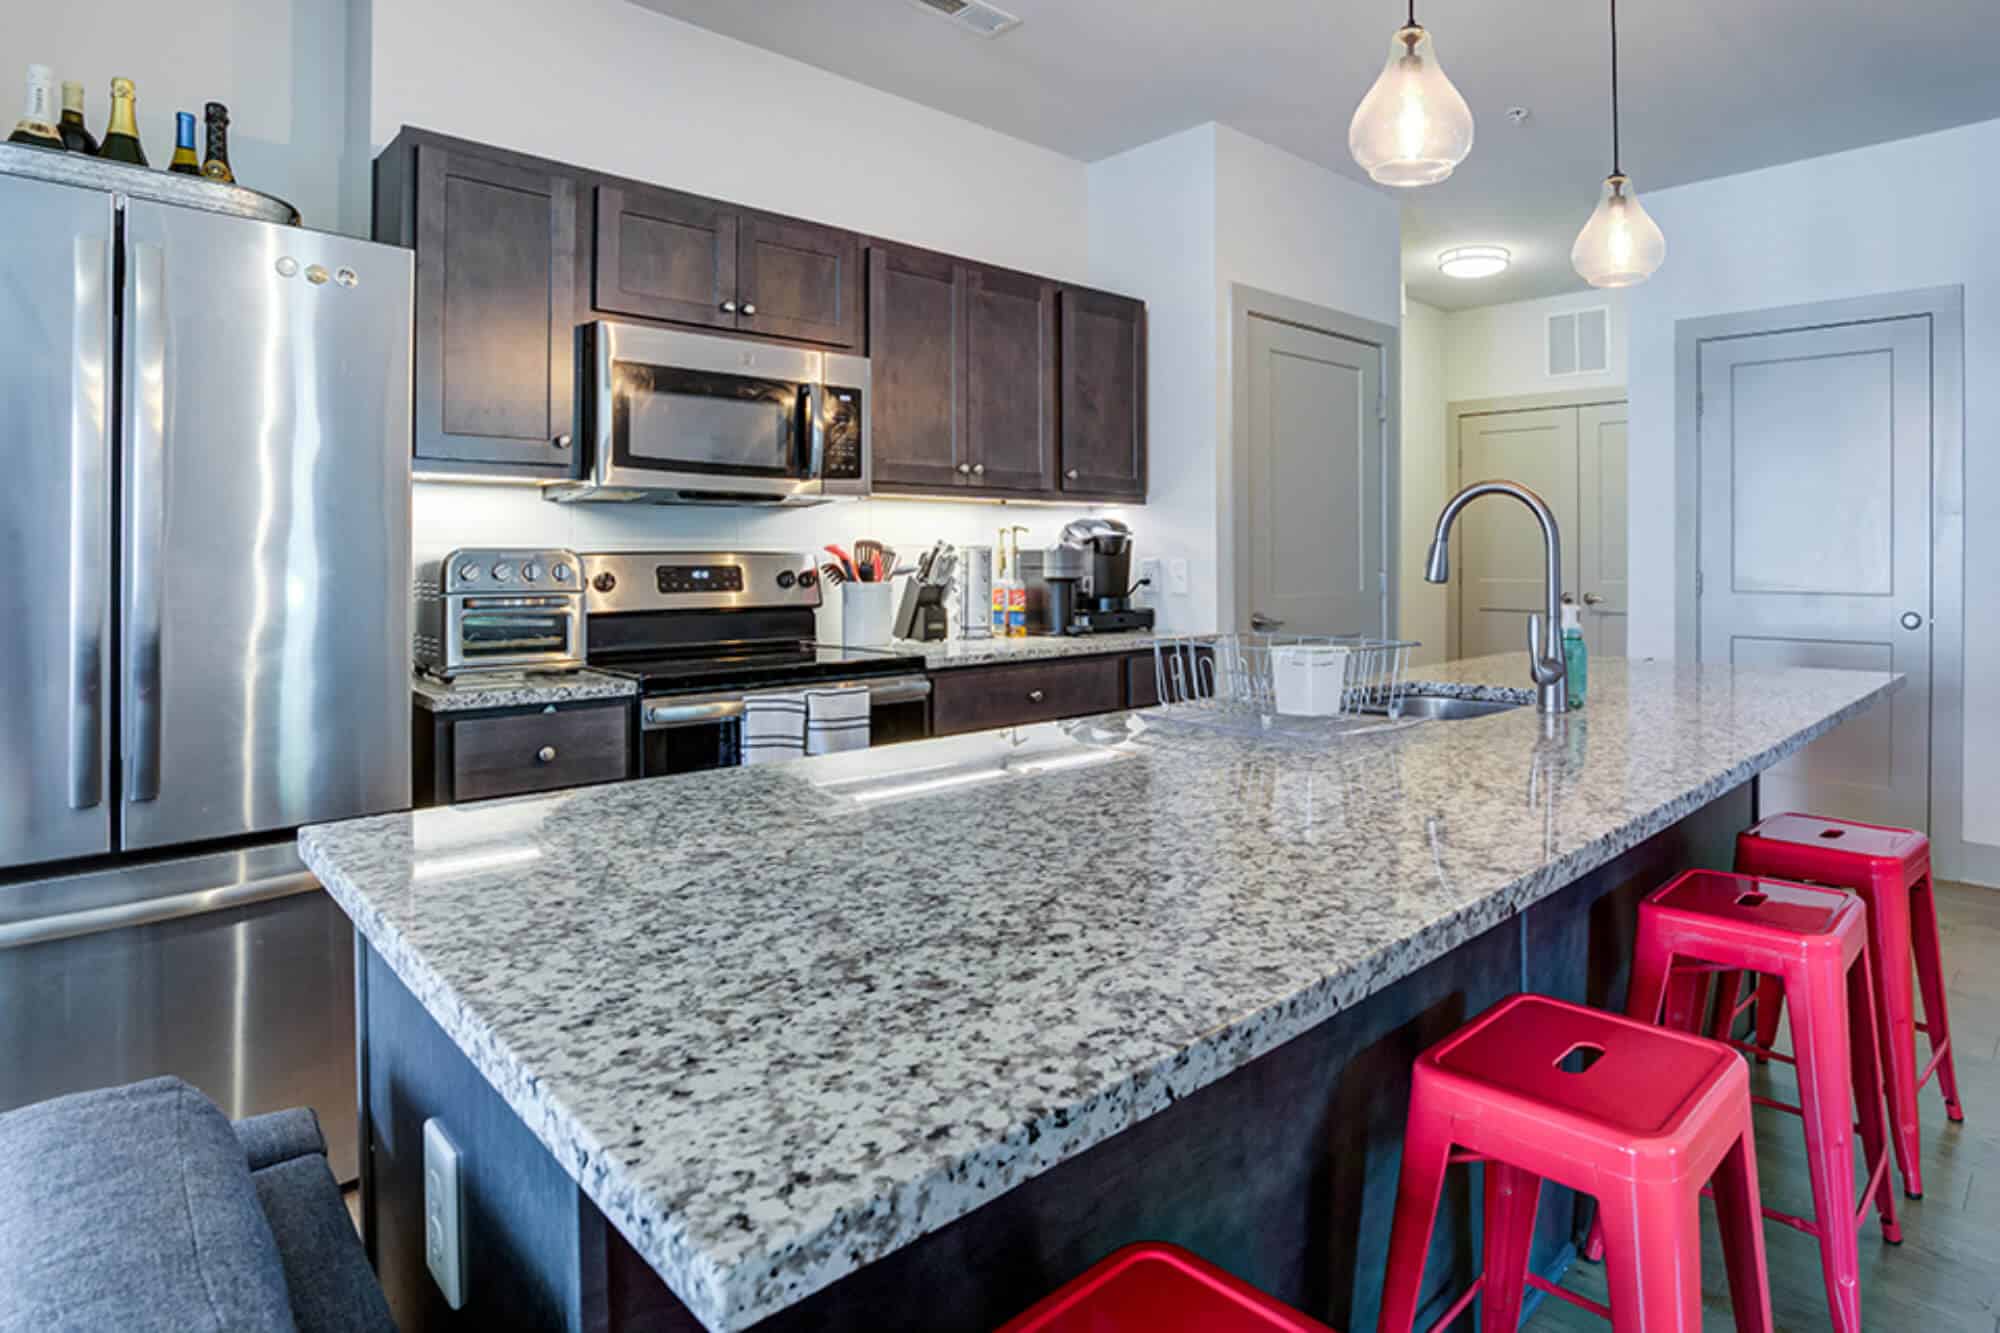 centennial luxury off campus apartments near nc state fully equipped kitchens with granite countertops and stainless steel appliances